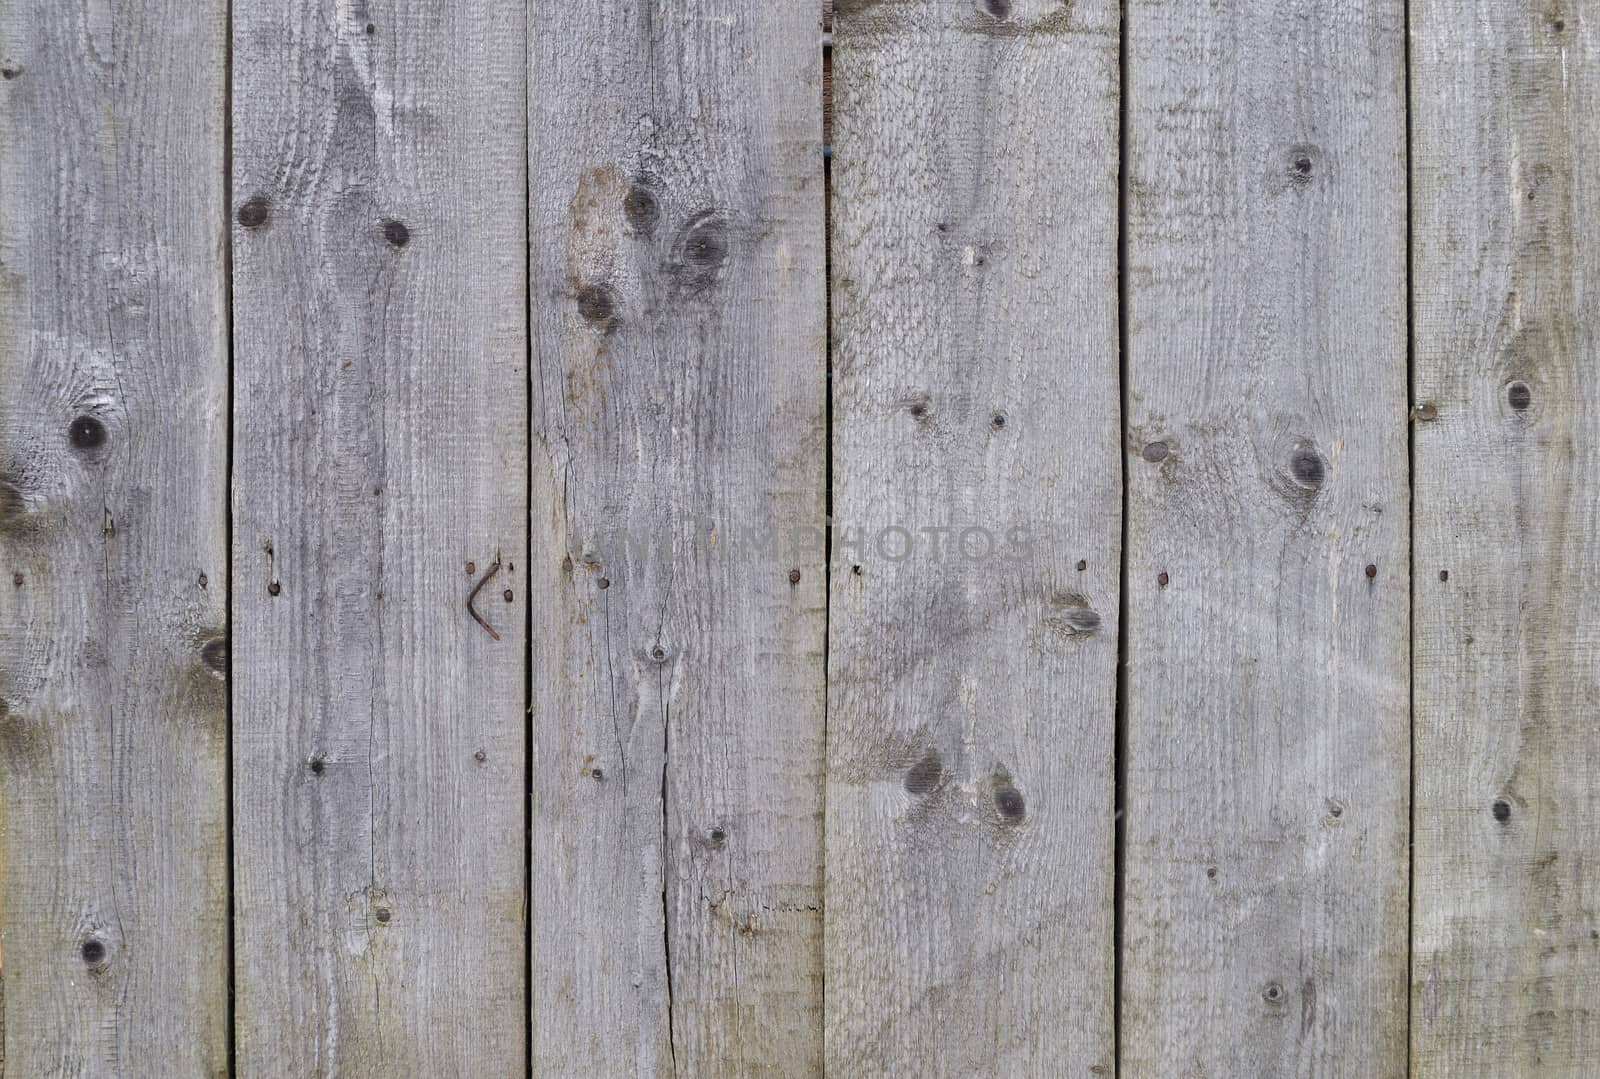 Rough gray wooden boards background by wander